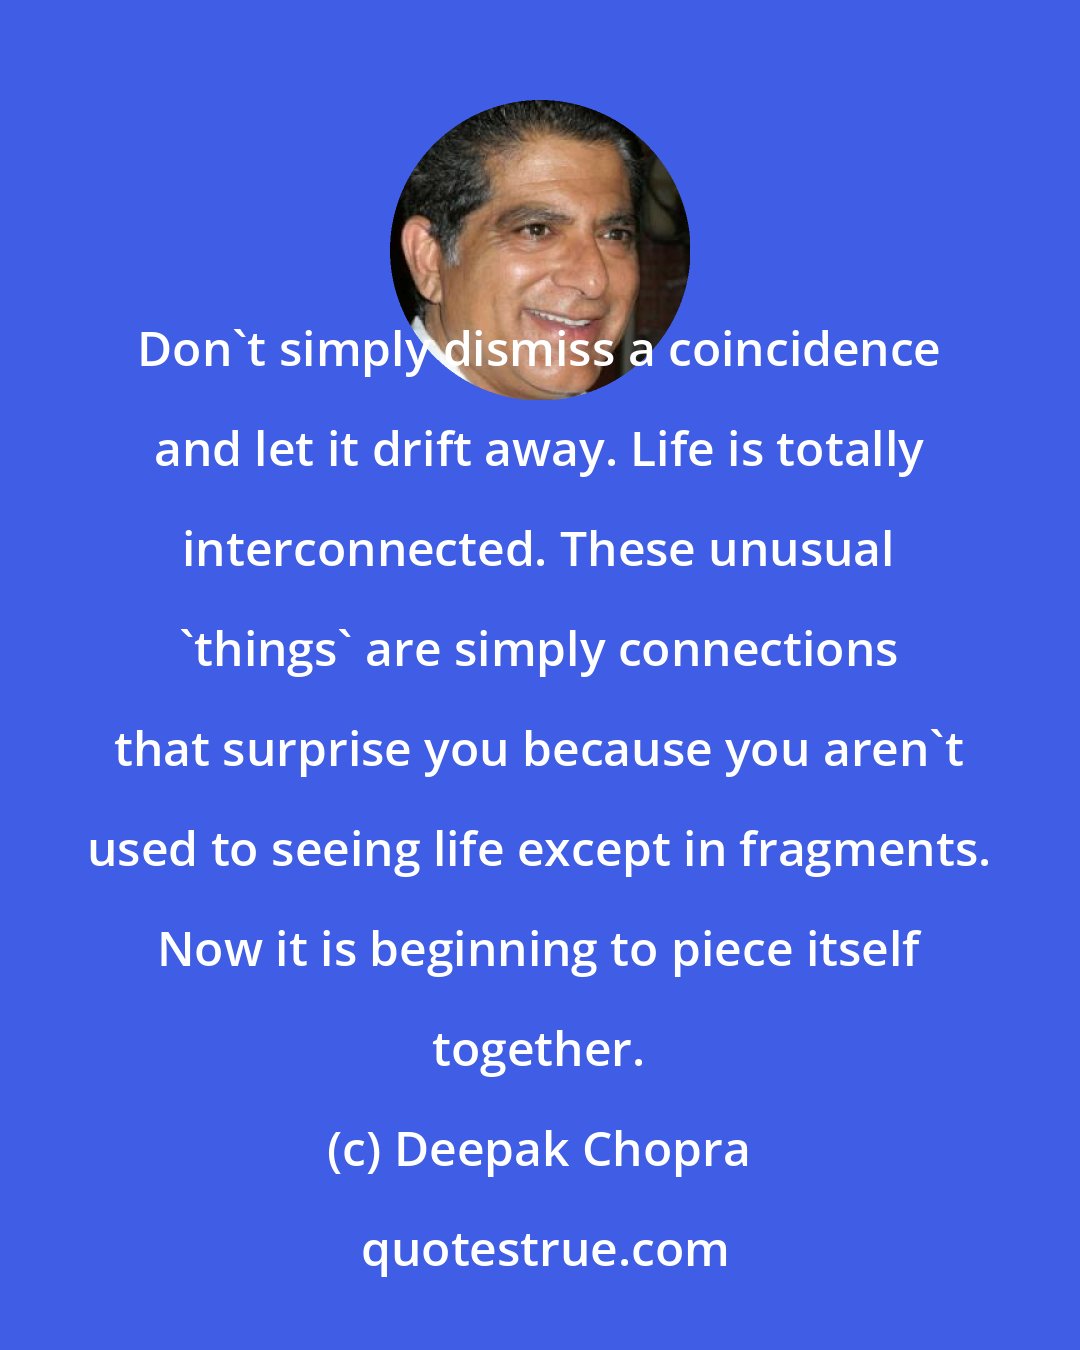 Deepak Chopra: Don't simply dismiss a coincidence and let it drift away. Life is totally interconnected. These unusual 'things' are simply connections that surprise you because you aren't used to seeing life except in fragments. Now it is beginning to piece itself together.